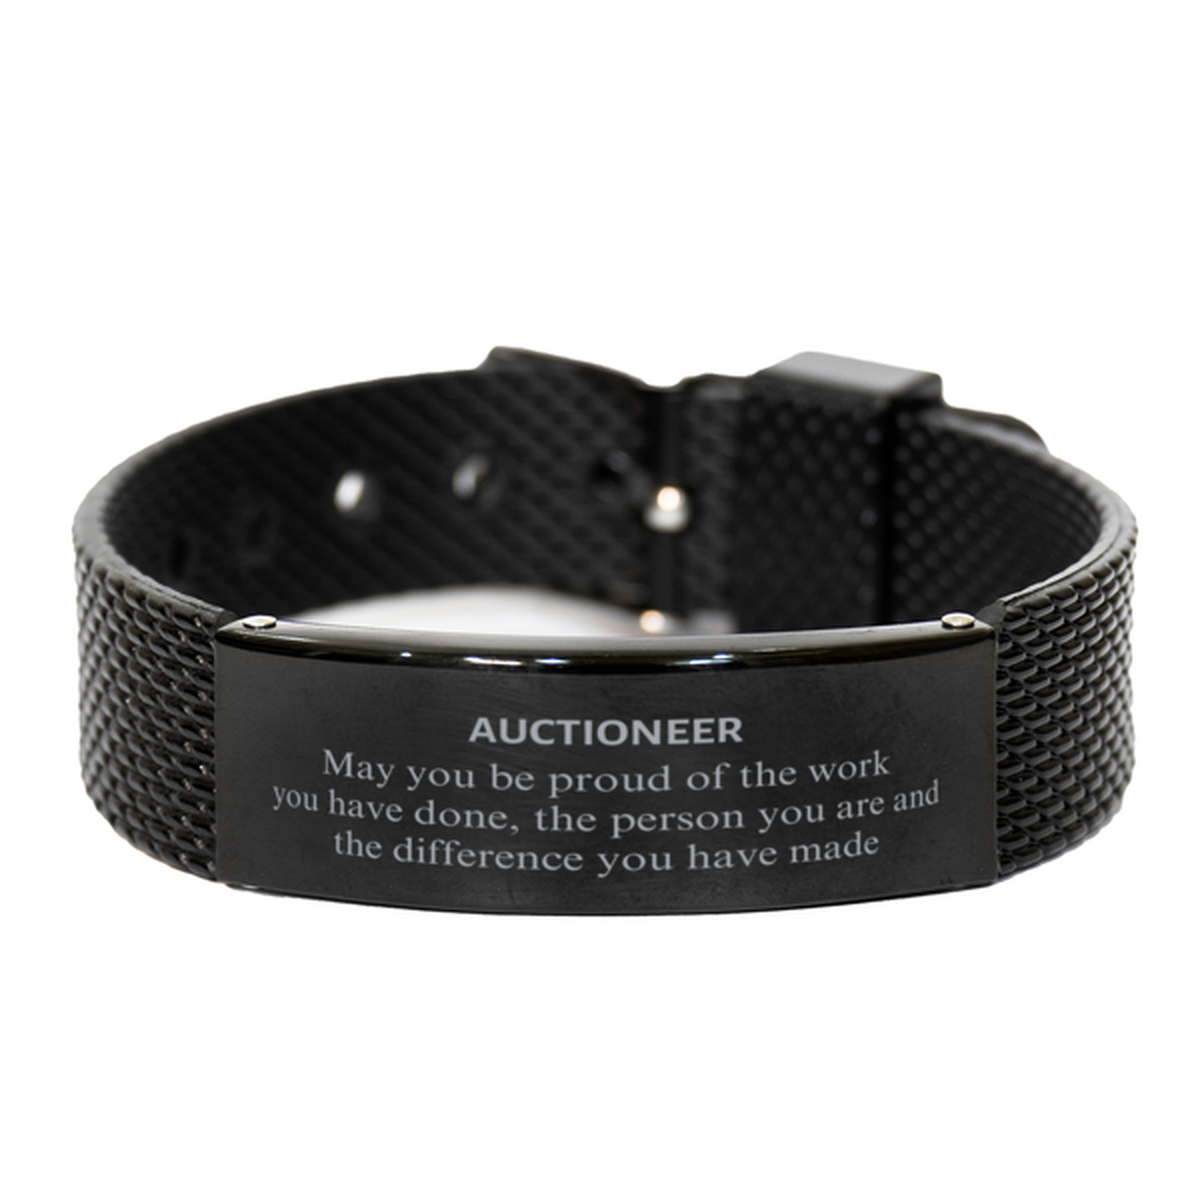 Auctioneer May you be proud of the work you have done, Retirement Auctioneer Black Shark Mesh Bracelet for Colleague Appreciation Gifts Amazing for Auctioneer